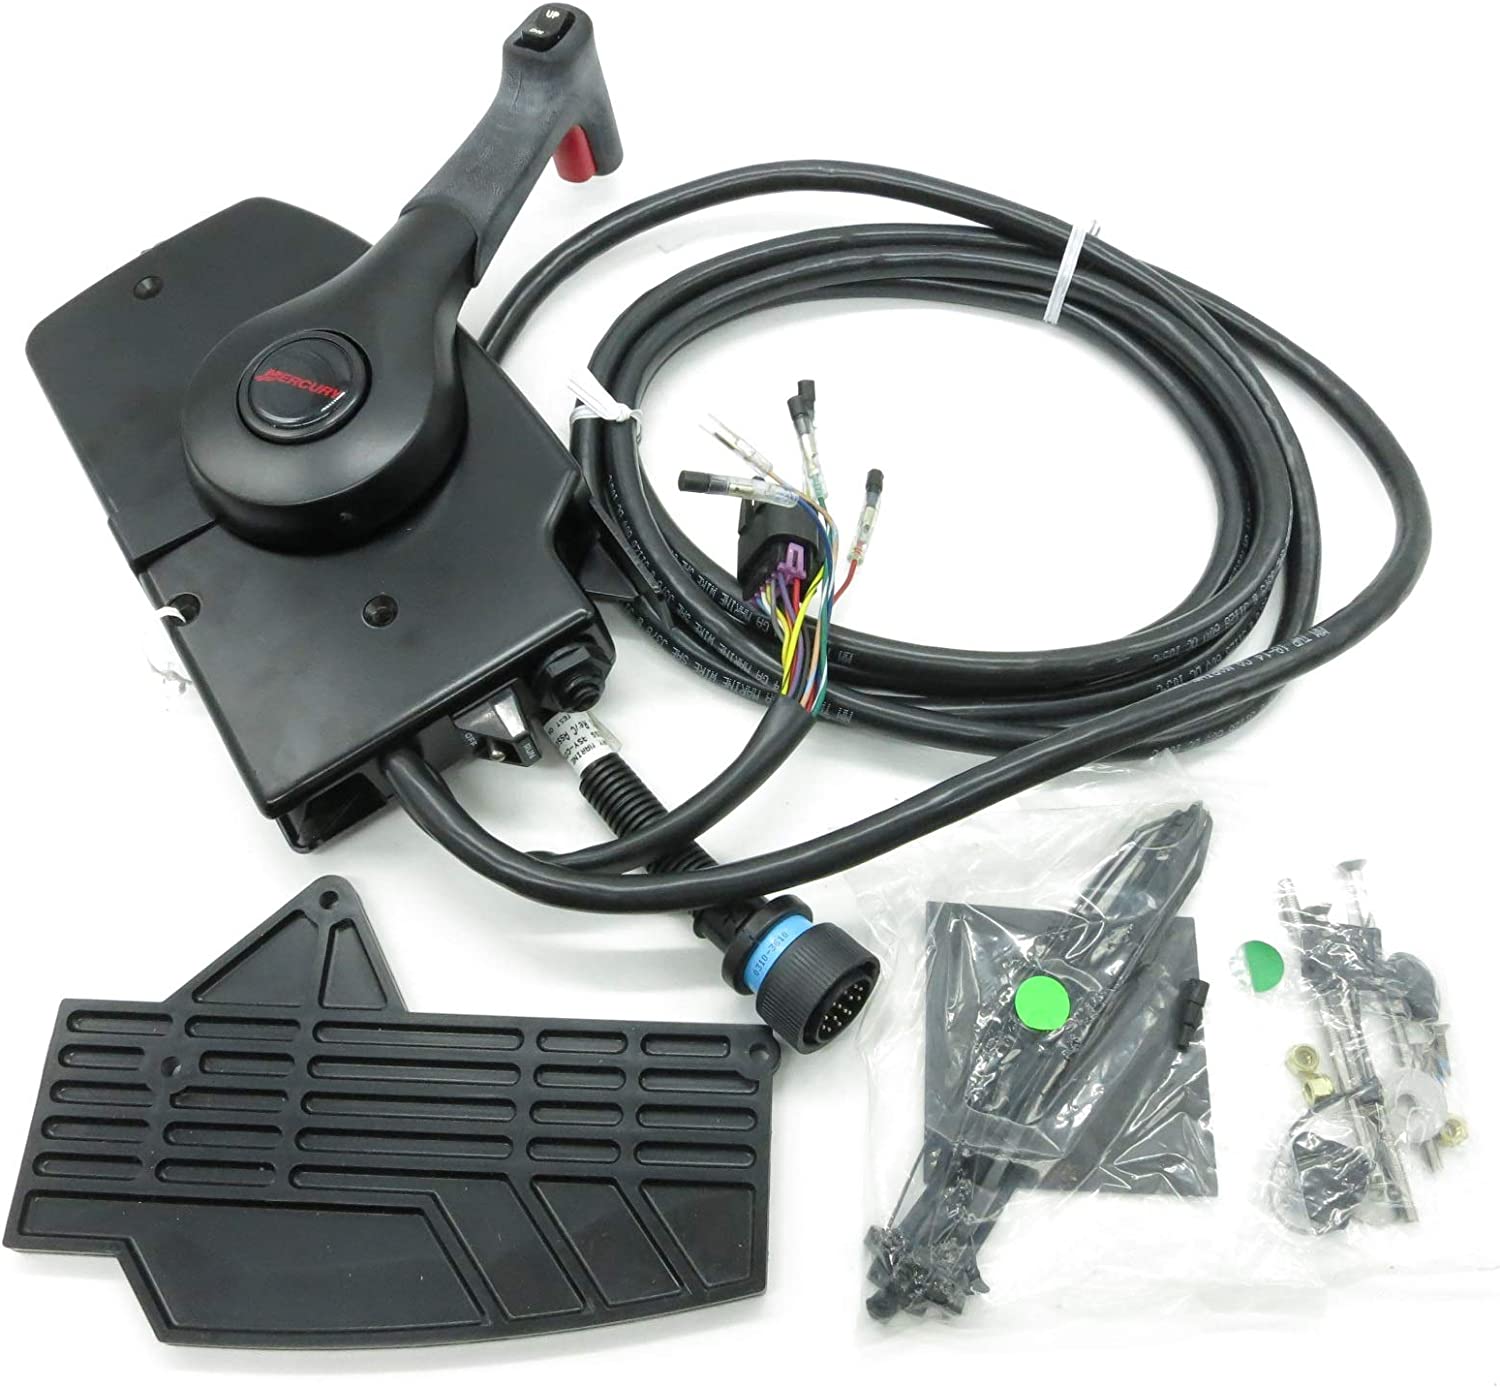 New OEM Mercury Outboard Side Mount 14 Pin Control Box Assembly w/ Trim  Switch & 15' Harness OEM # 881170A13 / Marine Parts Warehouse